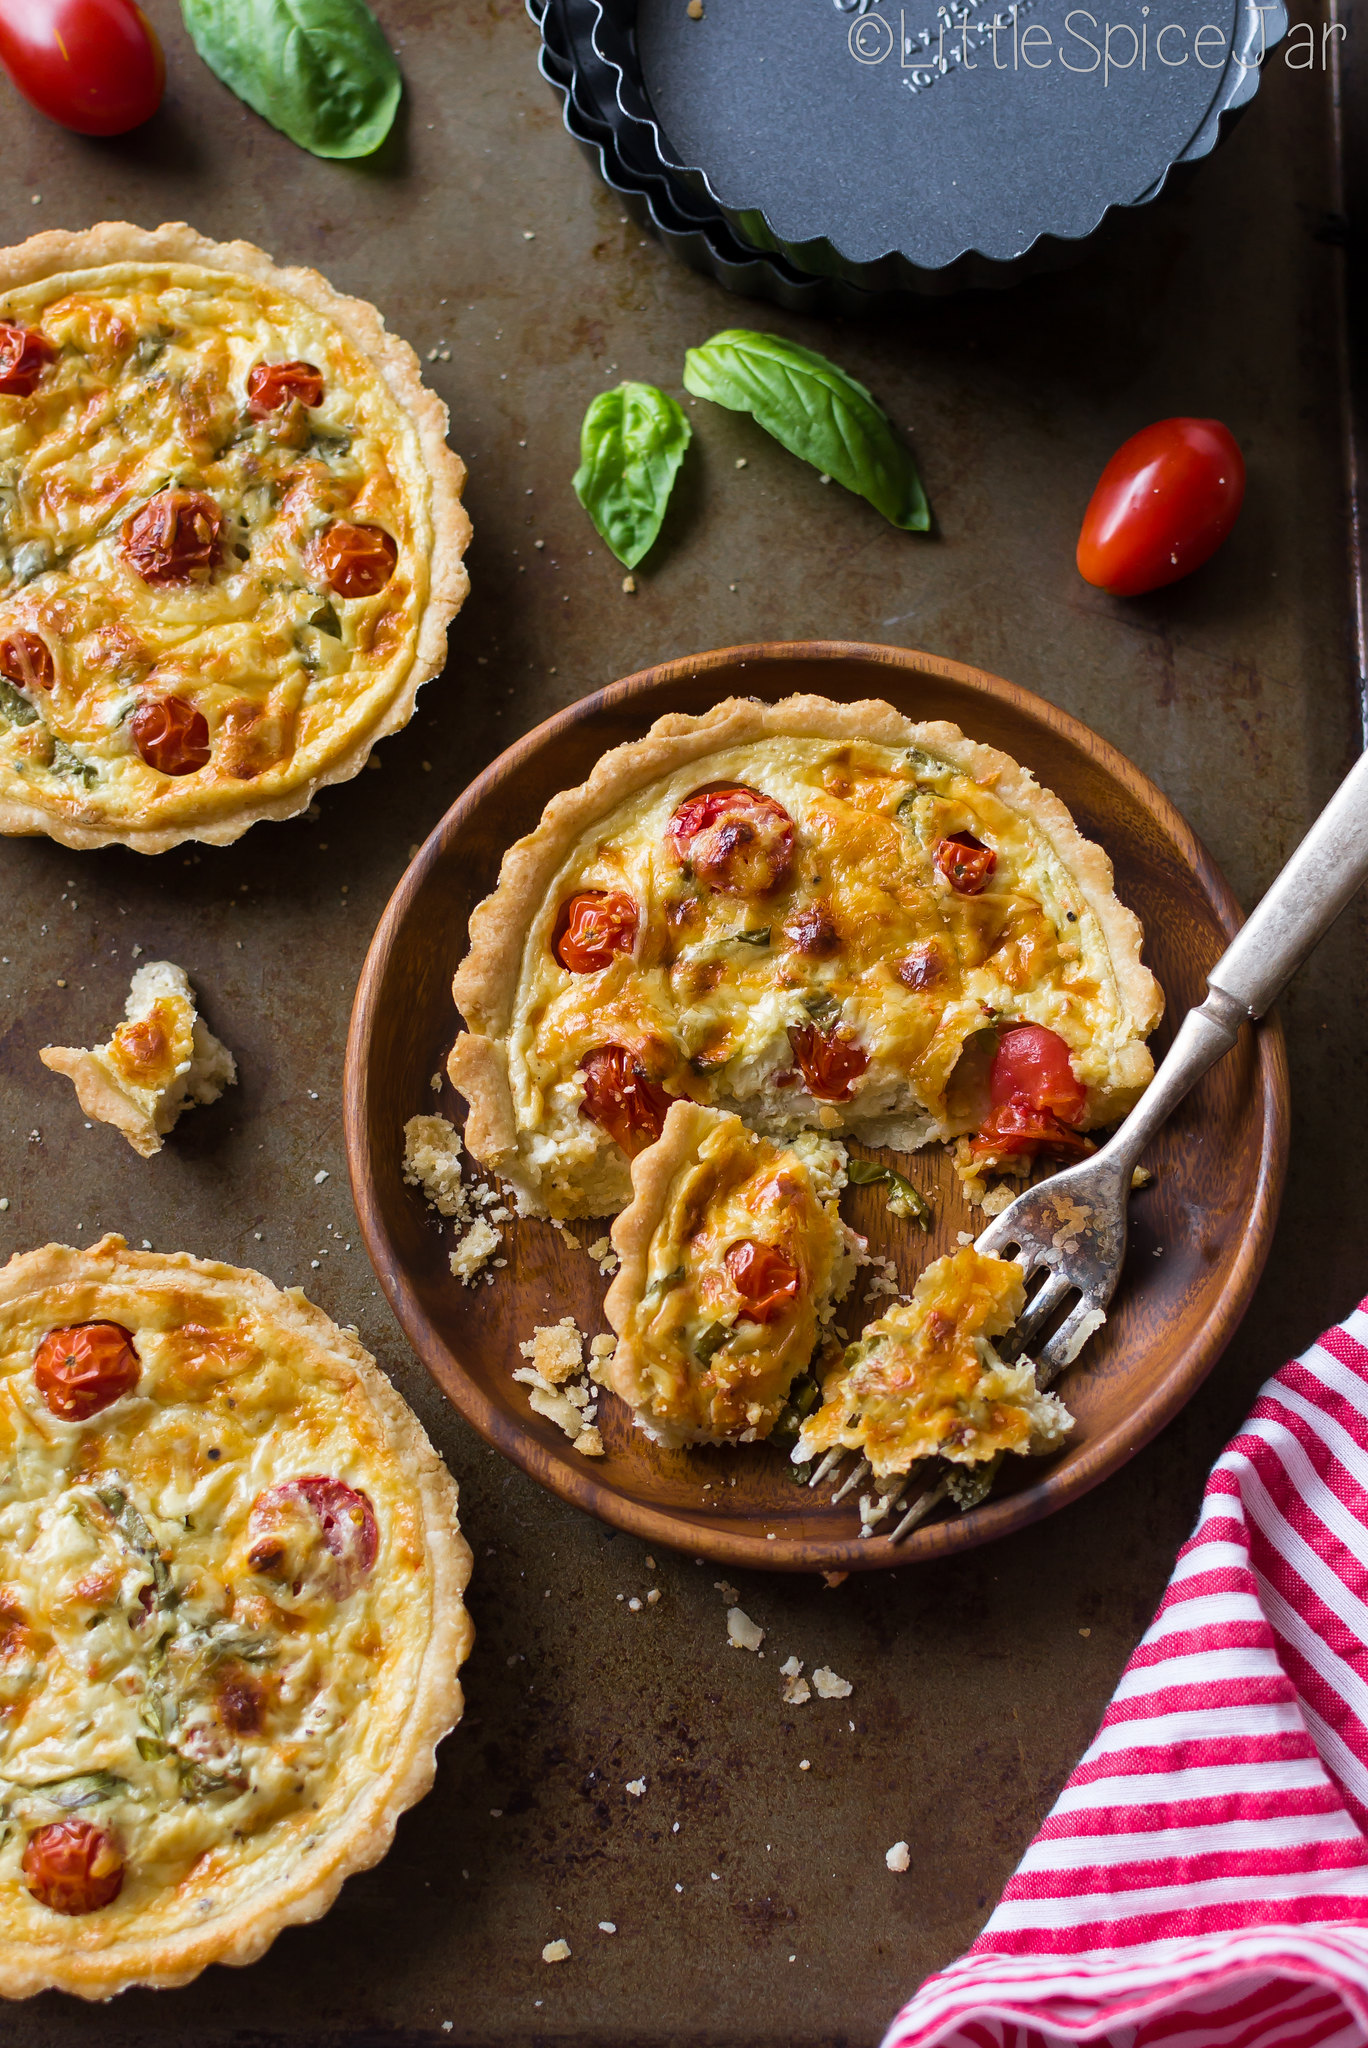 prepared quiche on wood plates with fork on sheet pan surface